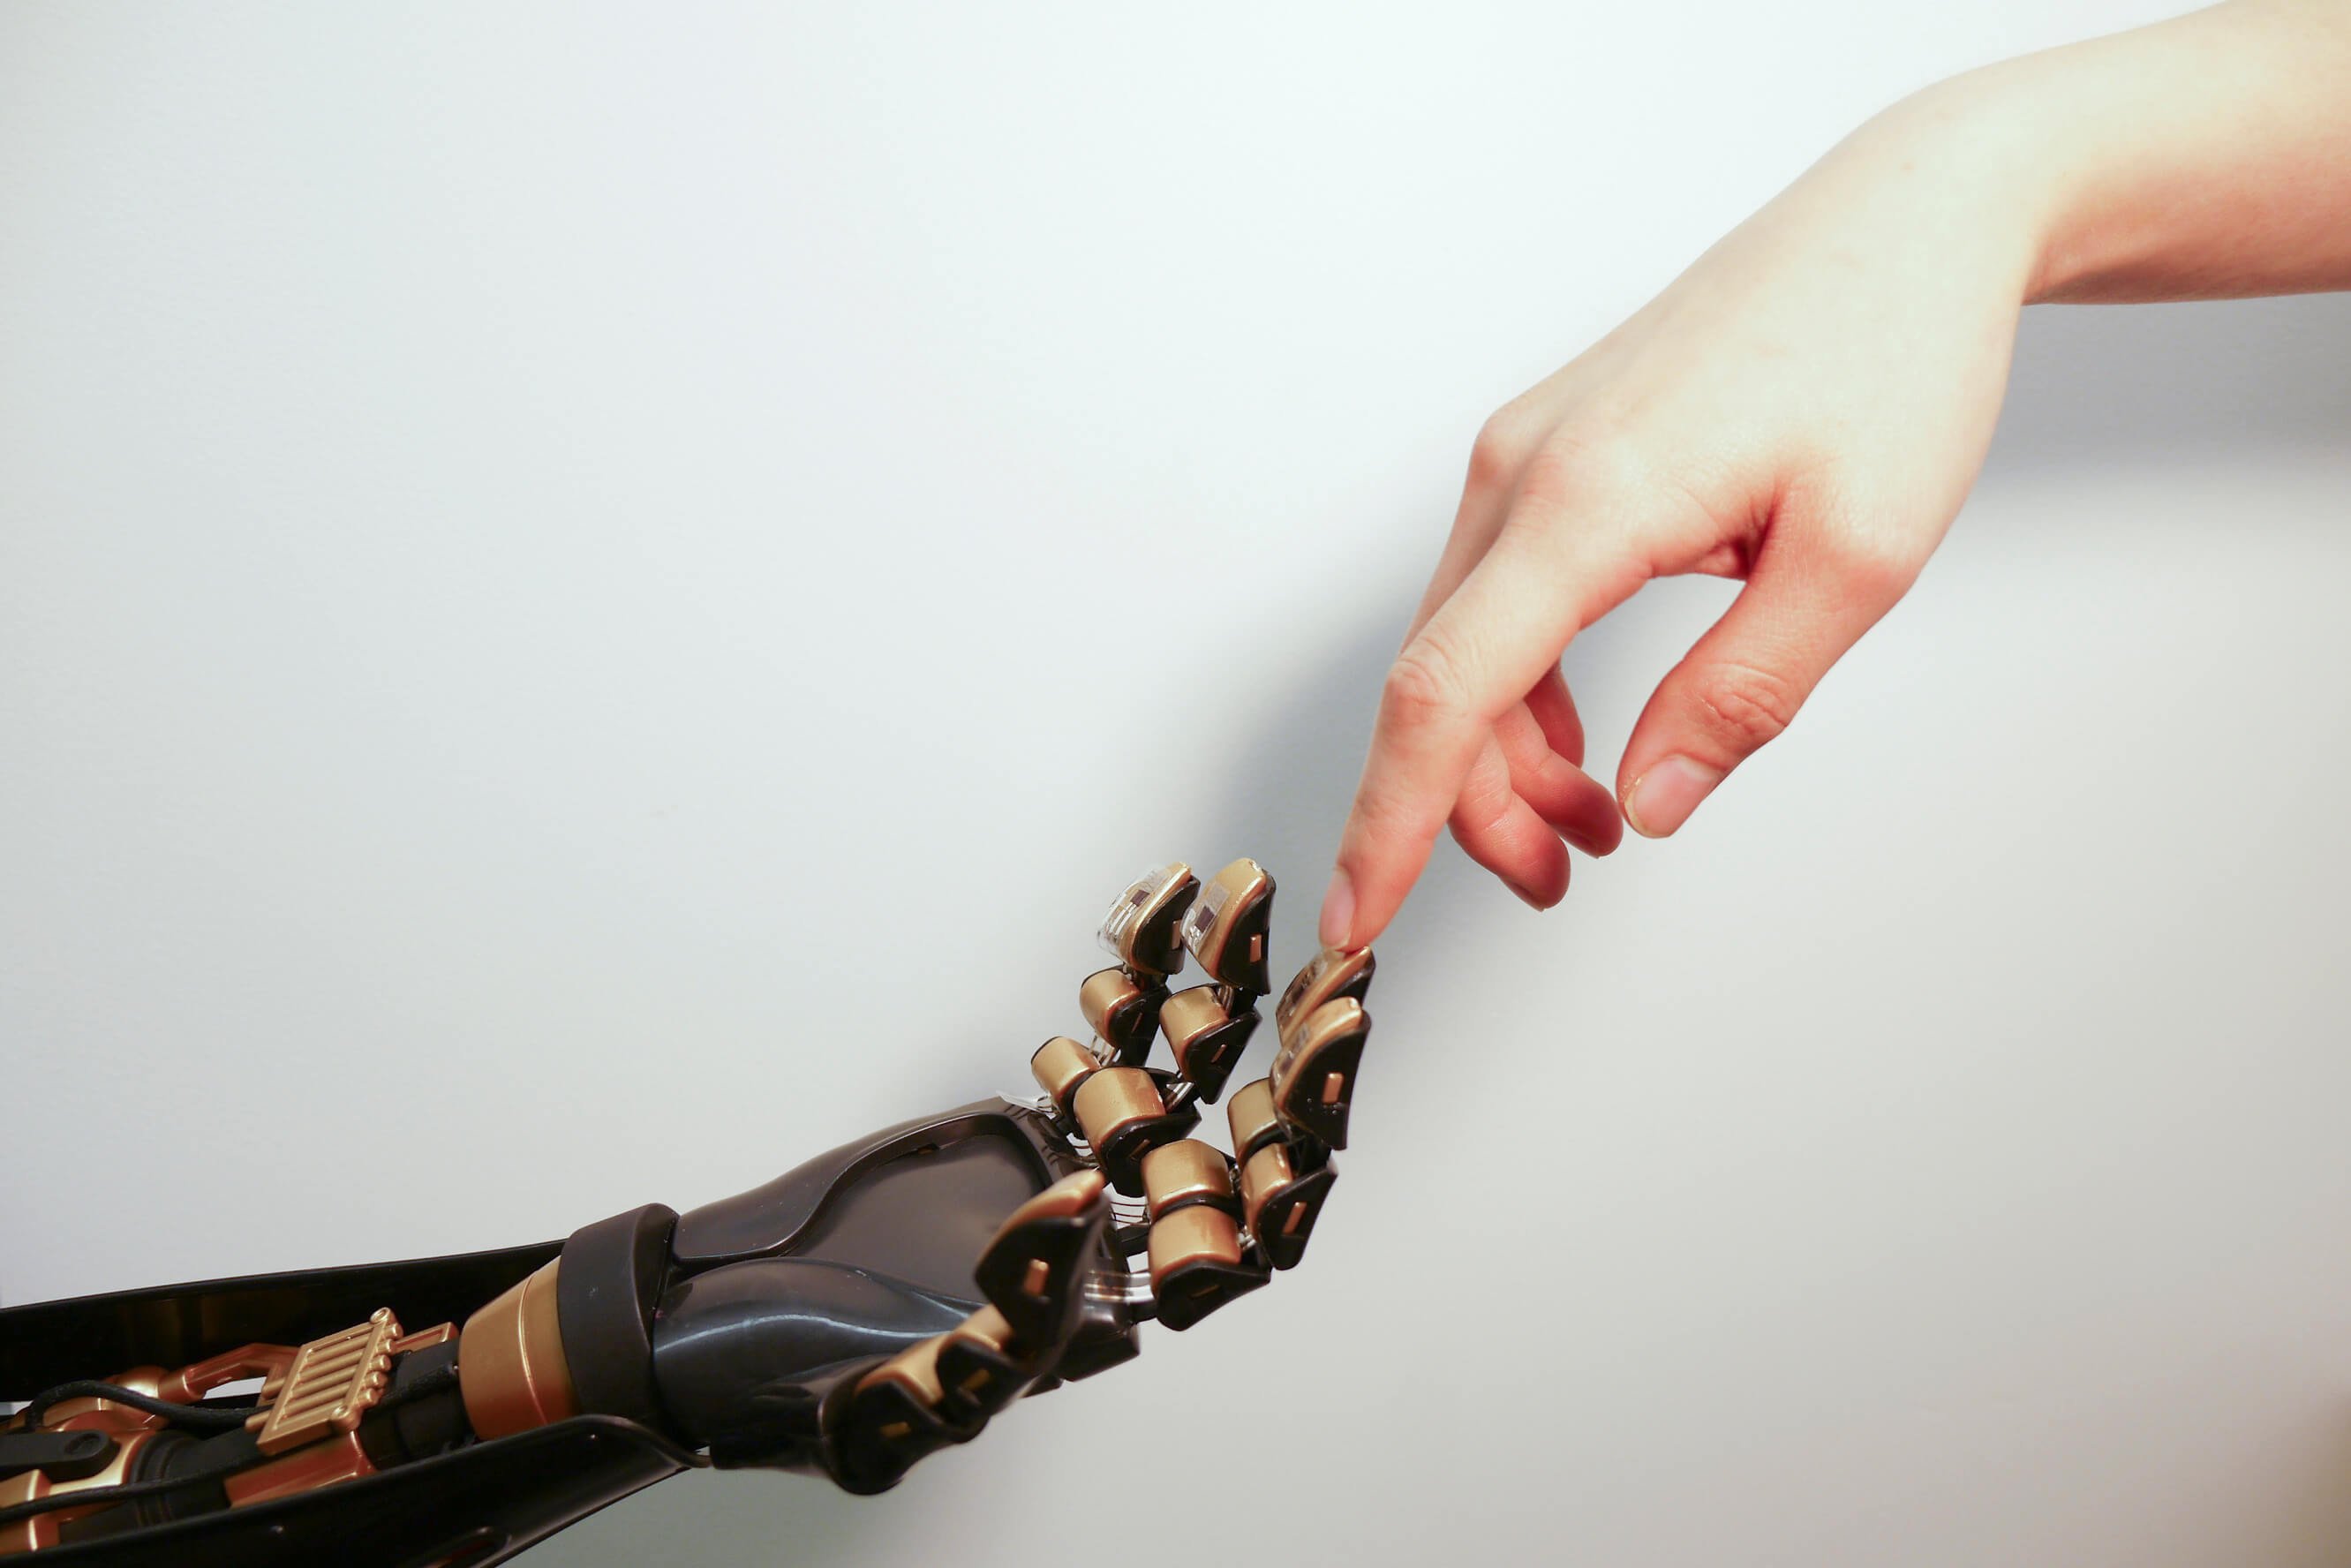 New electronic skin will allow you to control real and virtual objects